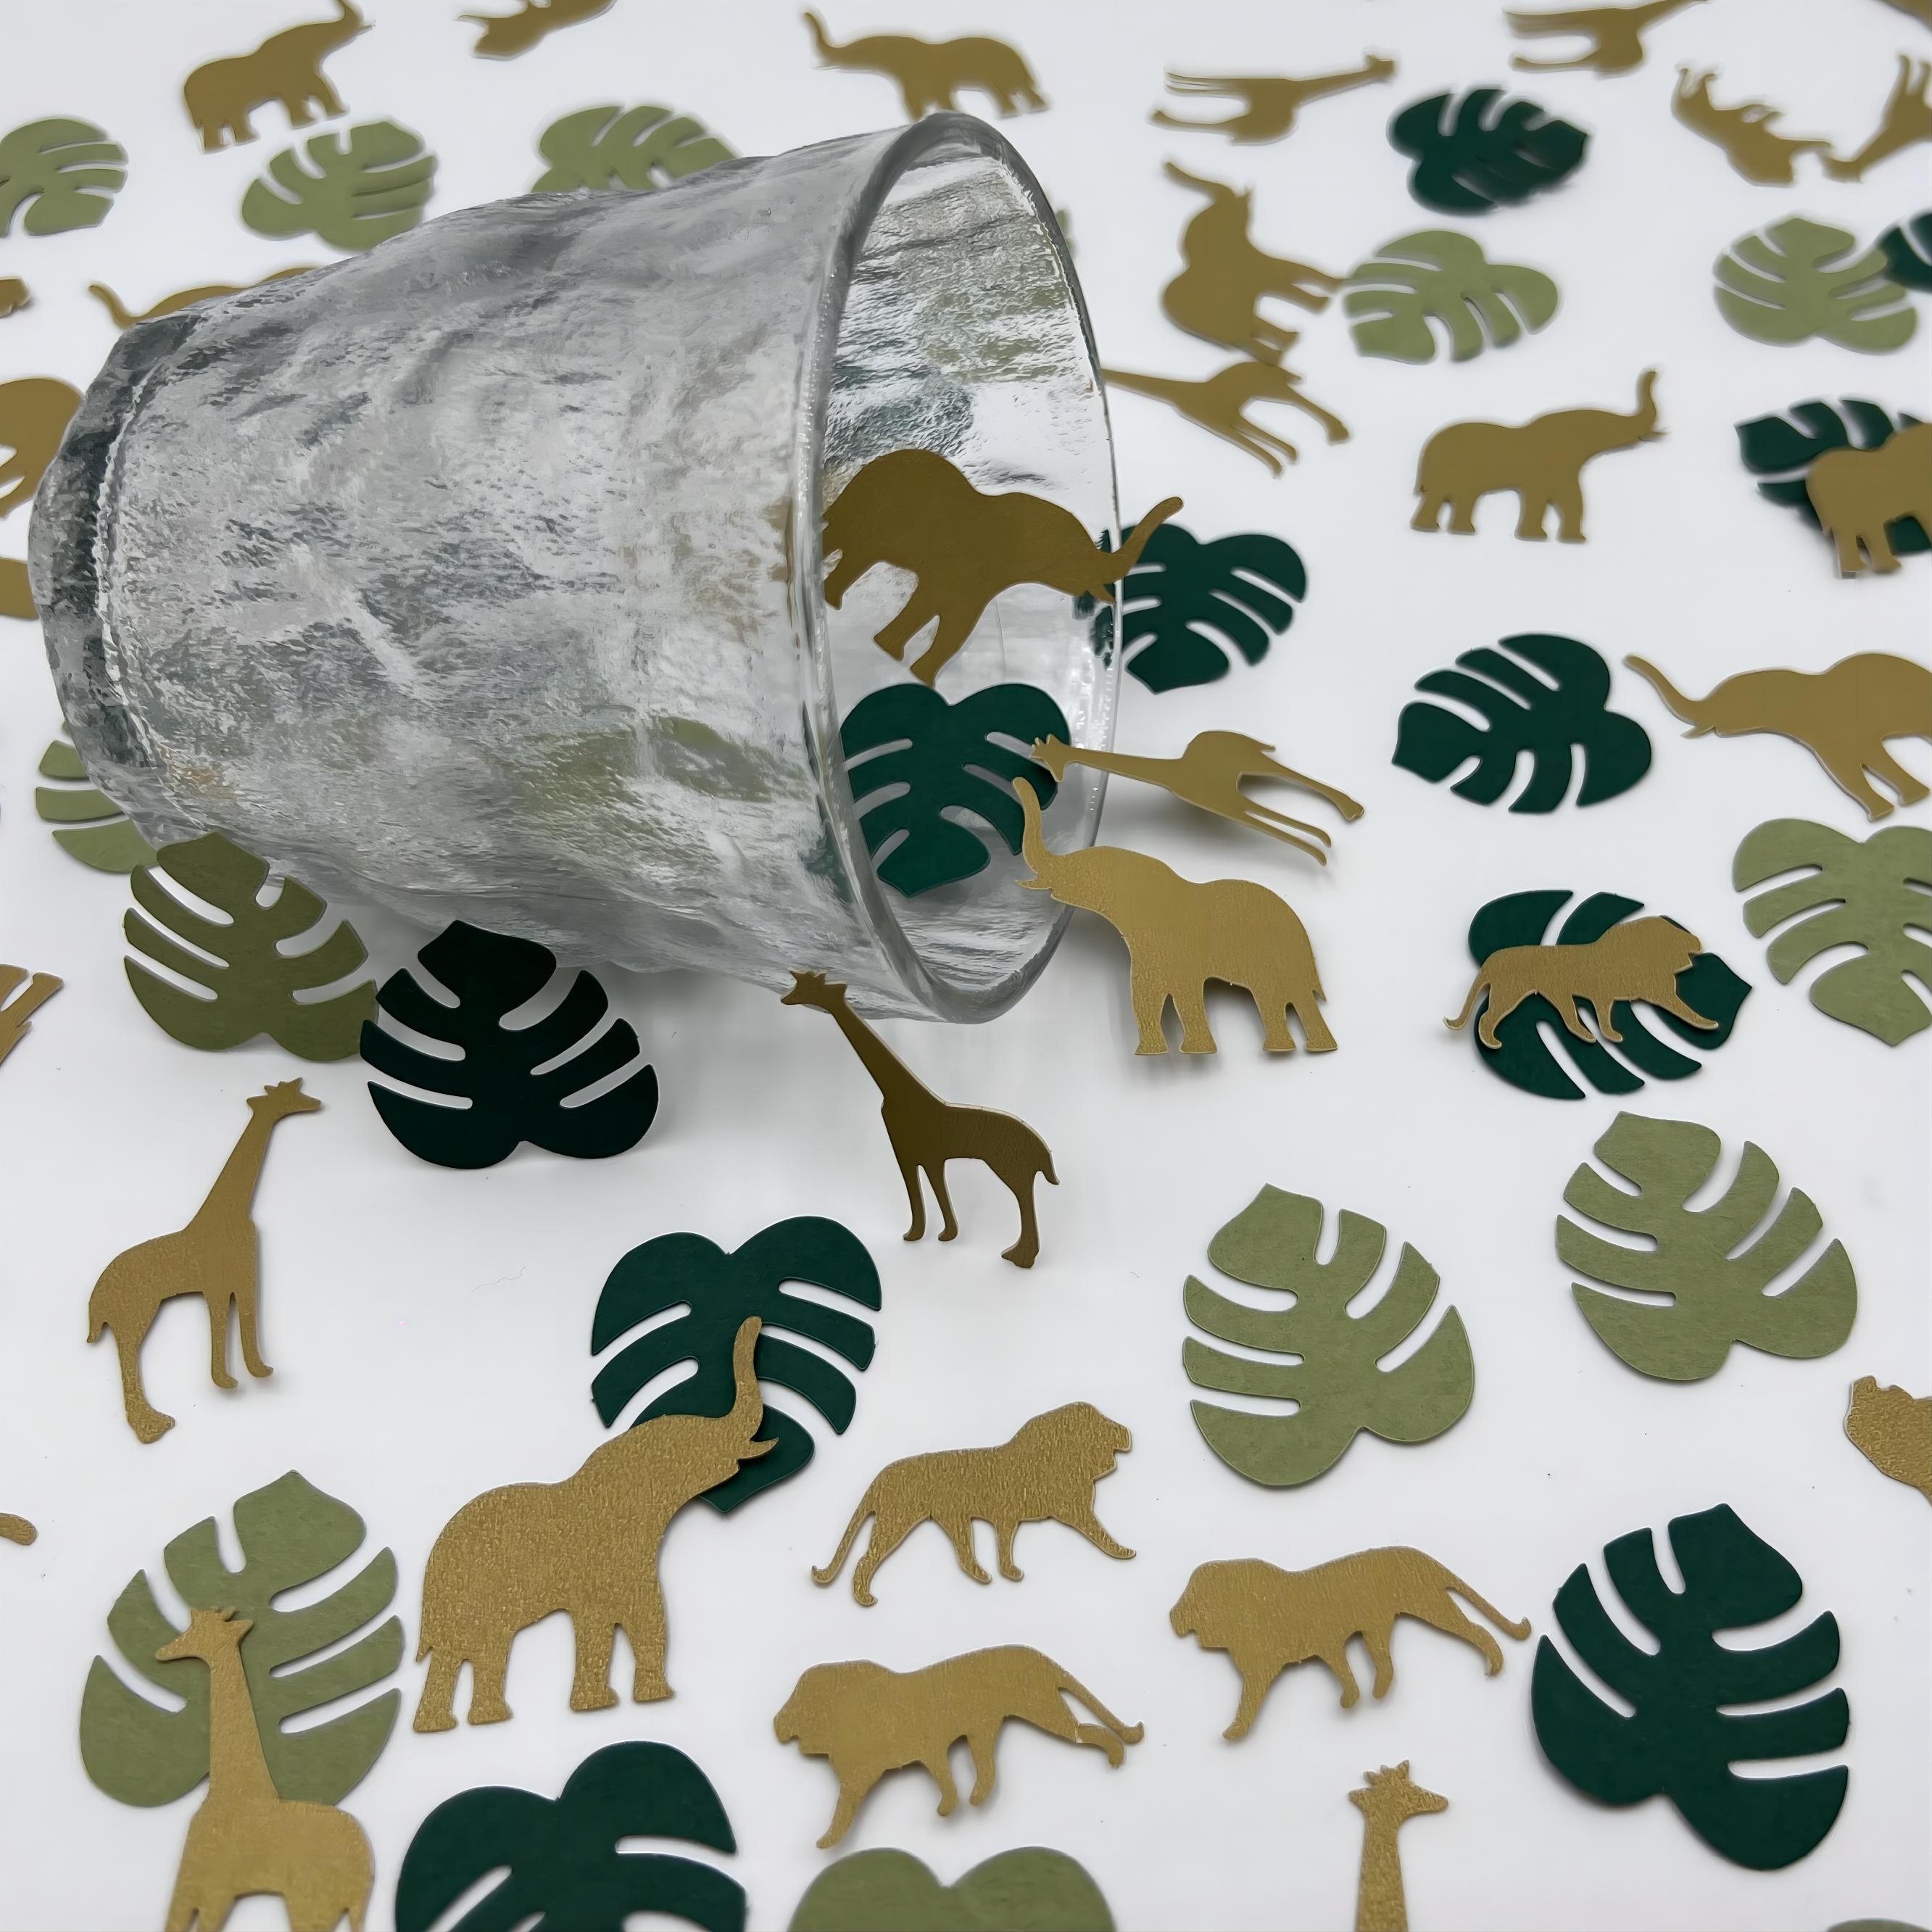 

Jungle Safari Animal Confetti Set Of 100 Pieces - Mixed Color Paper Table Decorations With Elephant, Lion, Giraffe For Birthday And Holiday Party Supplies - Appropriate For Ages 14+